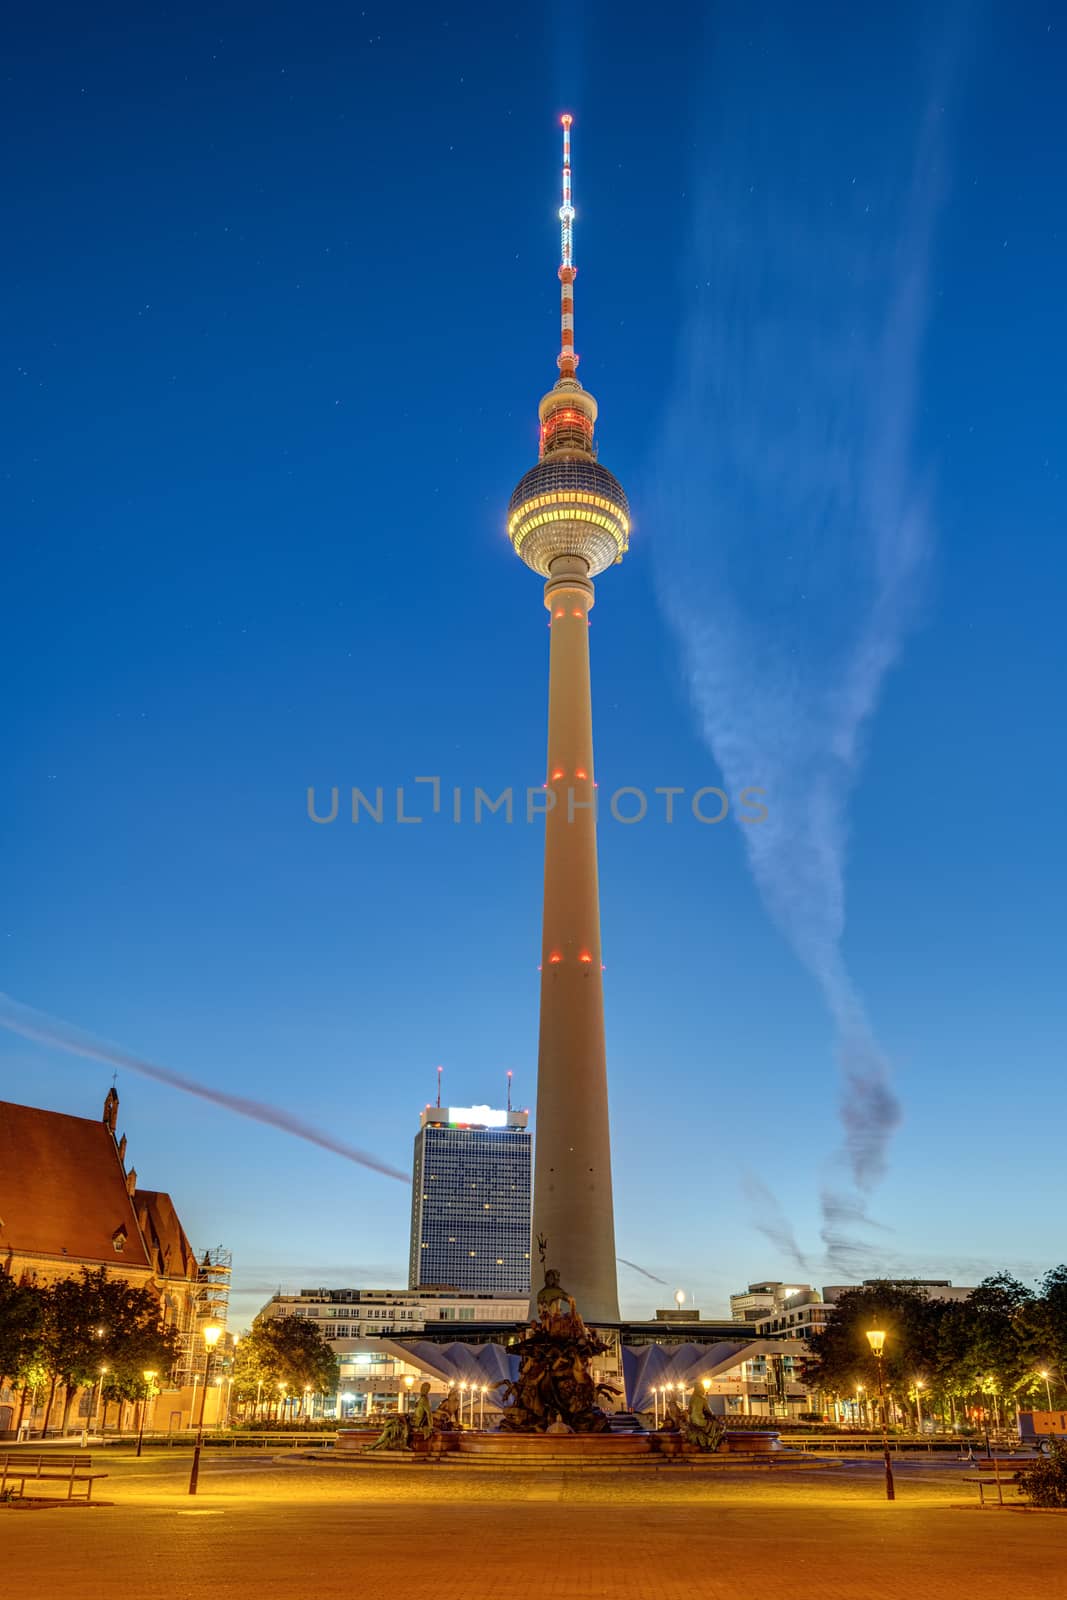 The famous Television Tower of Berlin by elxeneize